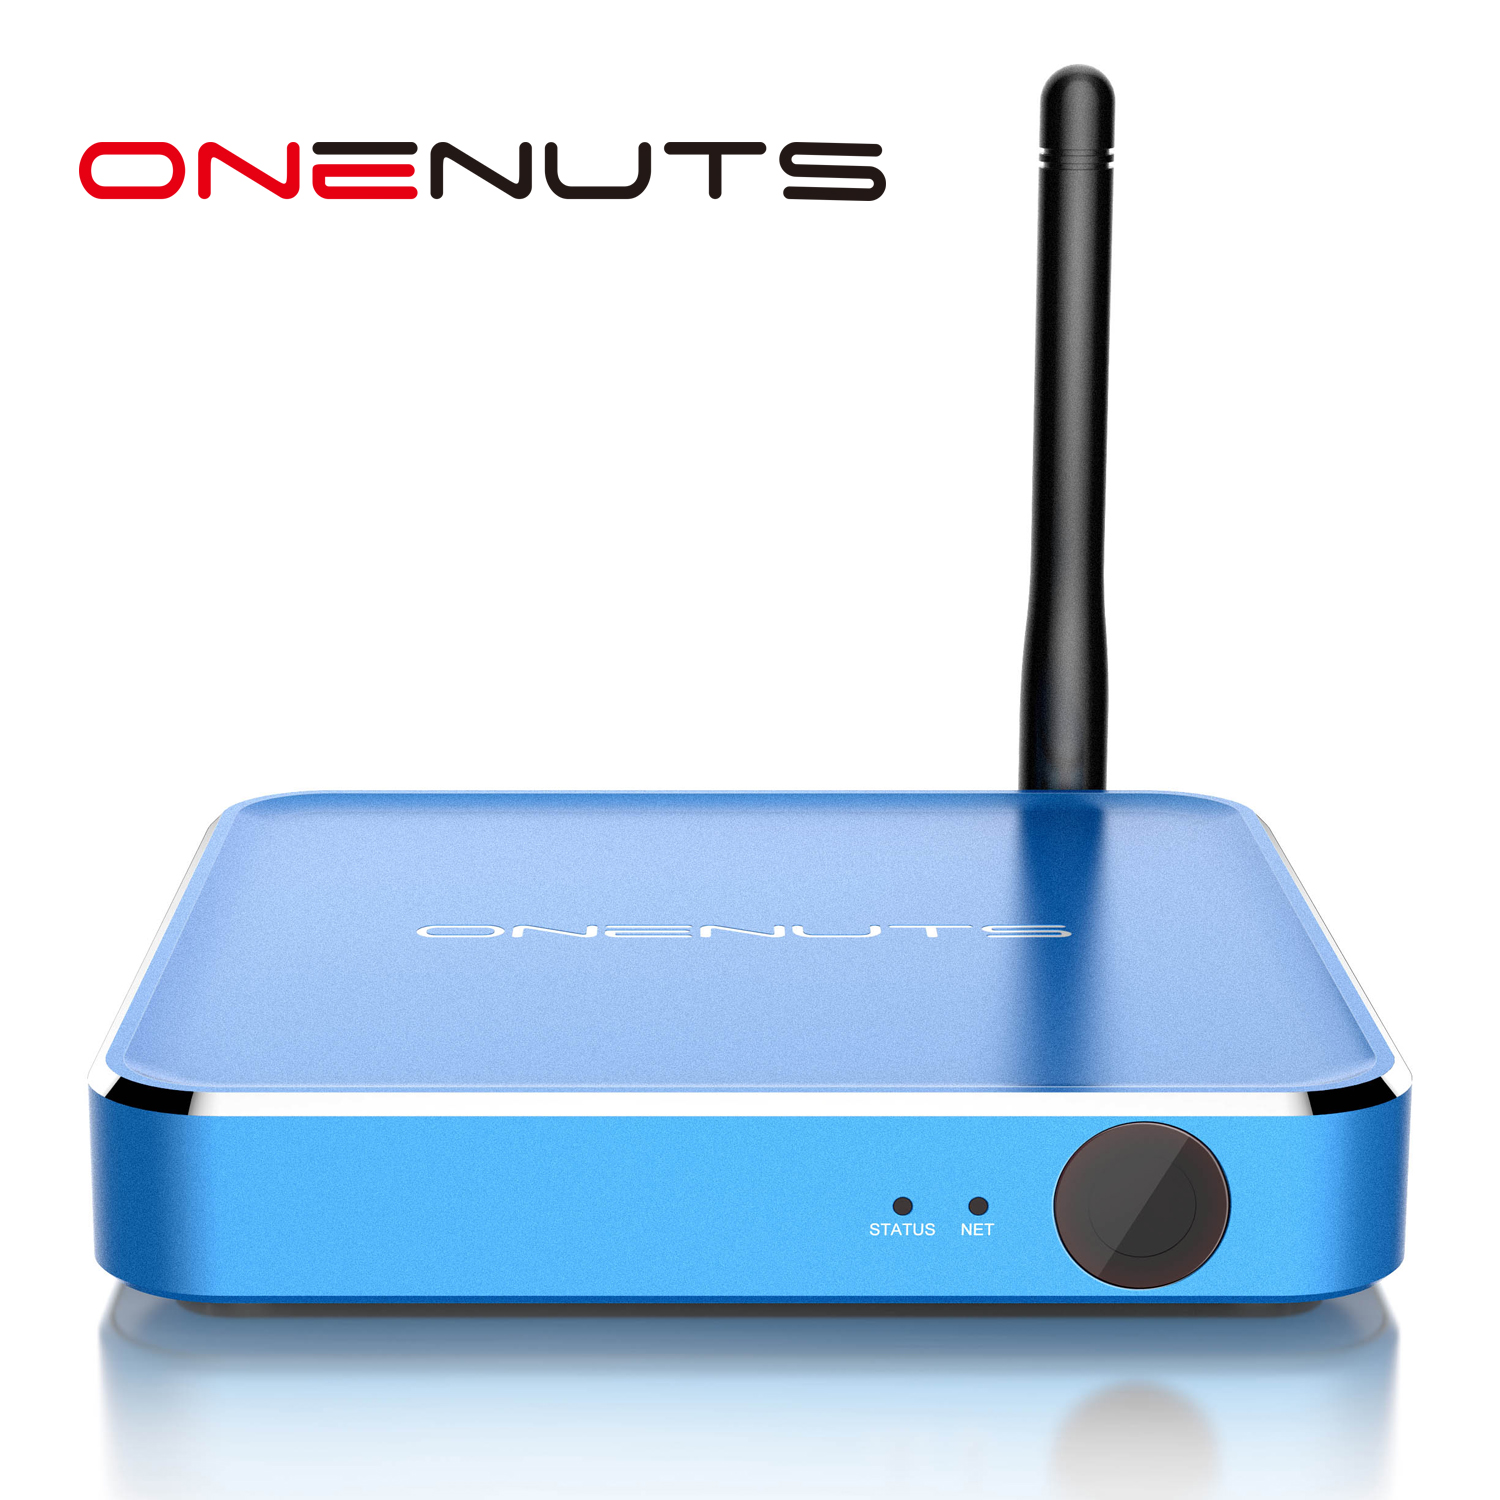 Nueva Android TV Box con Android 6.0, Network Media Player